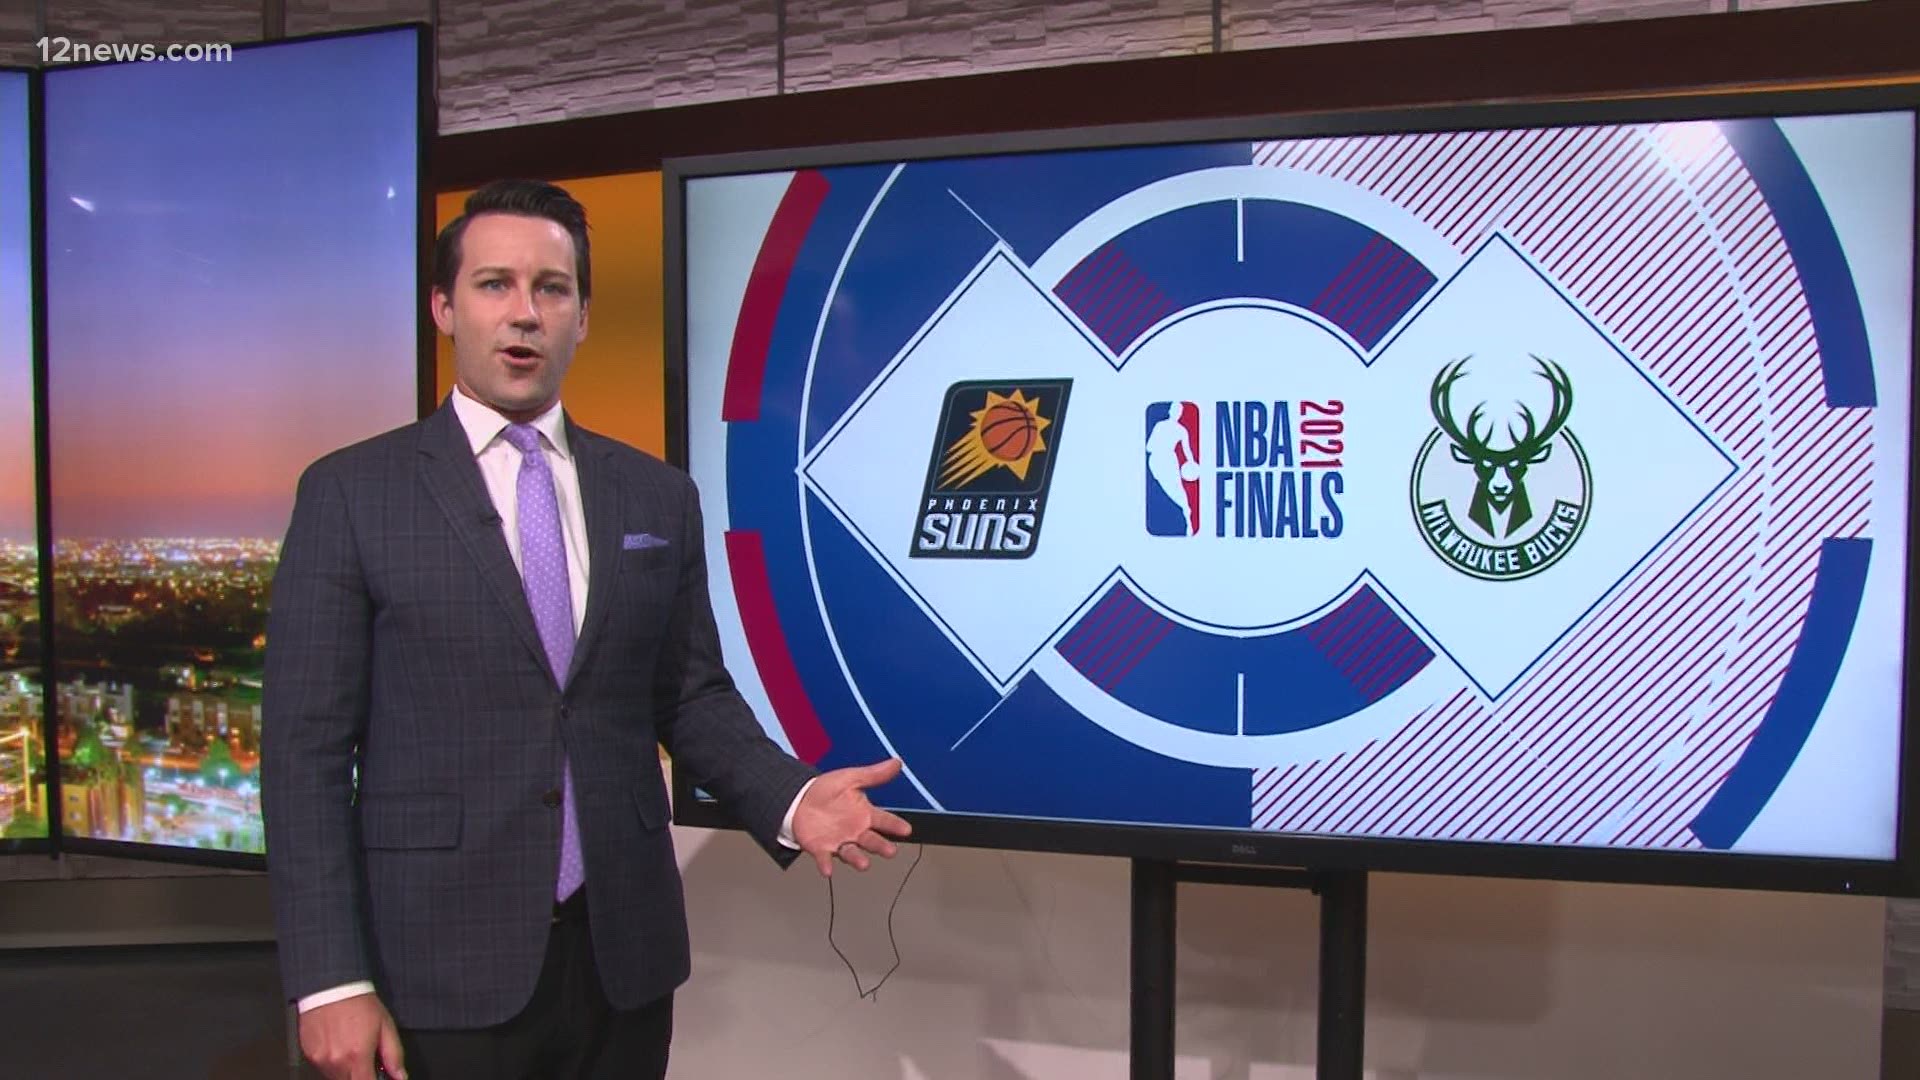 It's game day! Ryan Cody has three things to know ahead of Game 2 of the 2021 NBA Finals between the Phoenix Suns and Milwaukee Bucks.